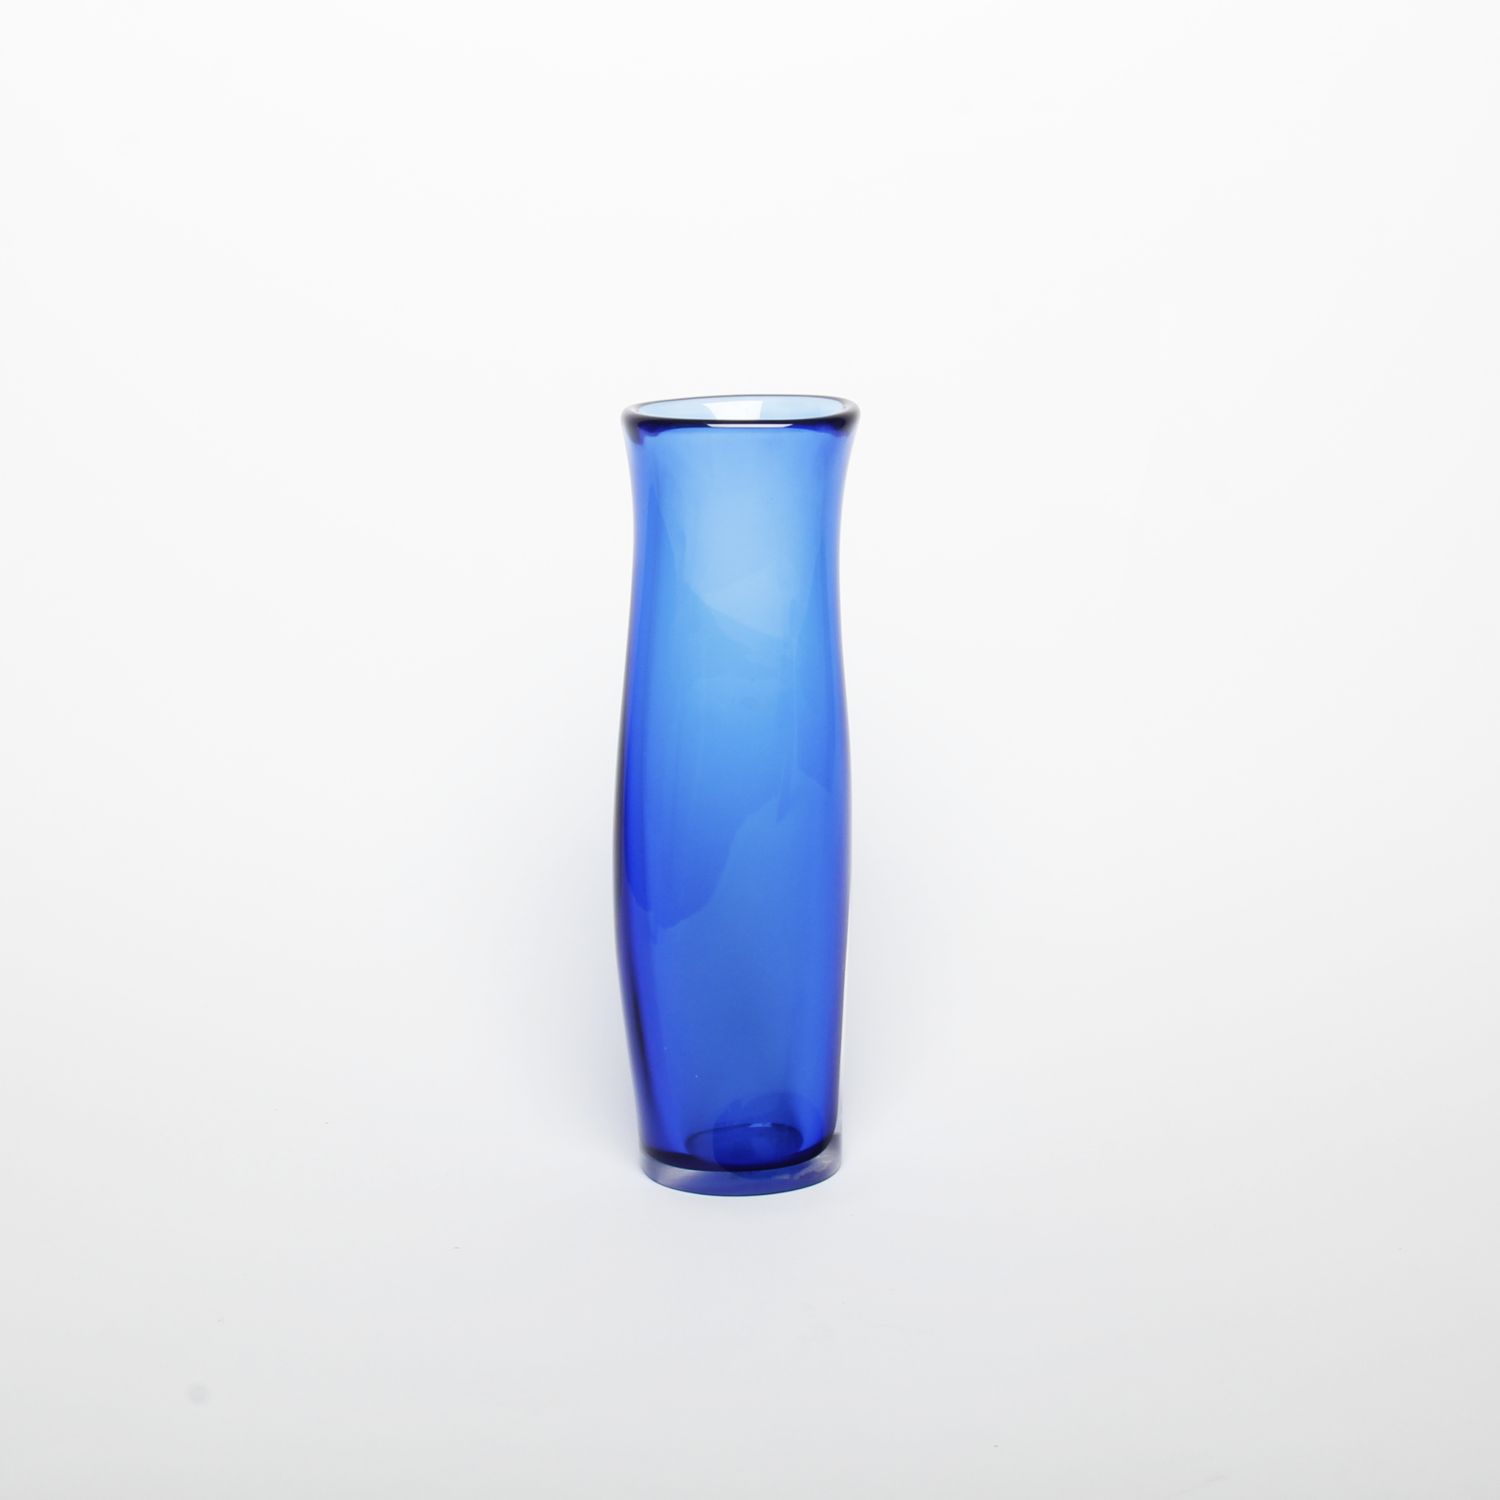 Jill Allan: Large Fat Lipped Vase (Assorted colours) Product Image 5 of 7